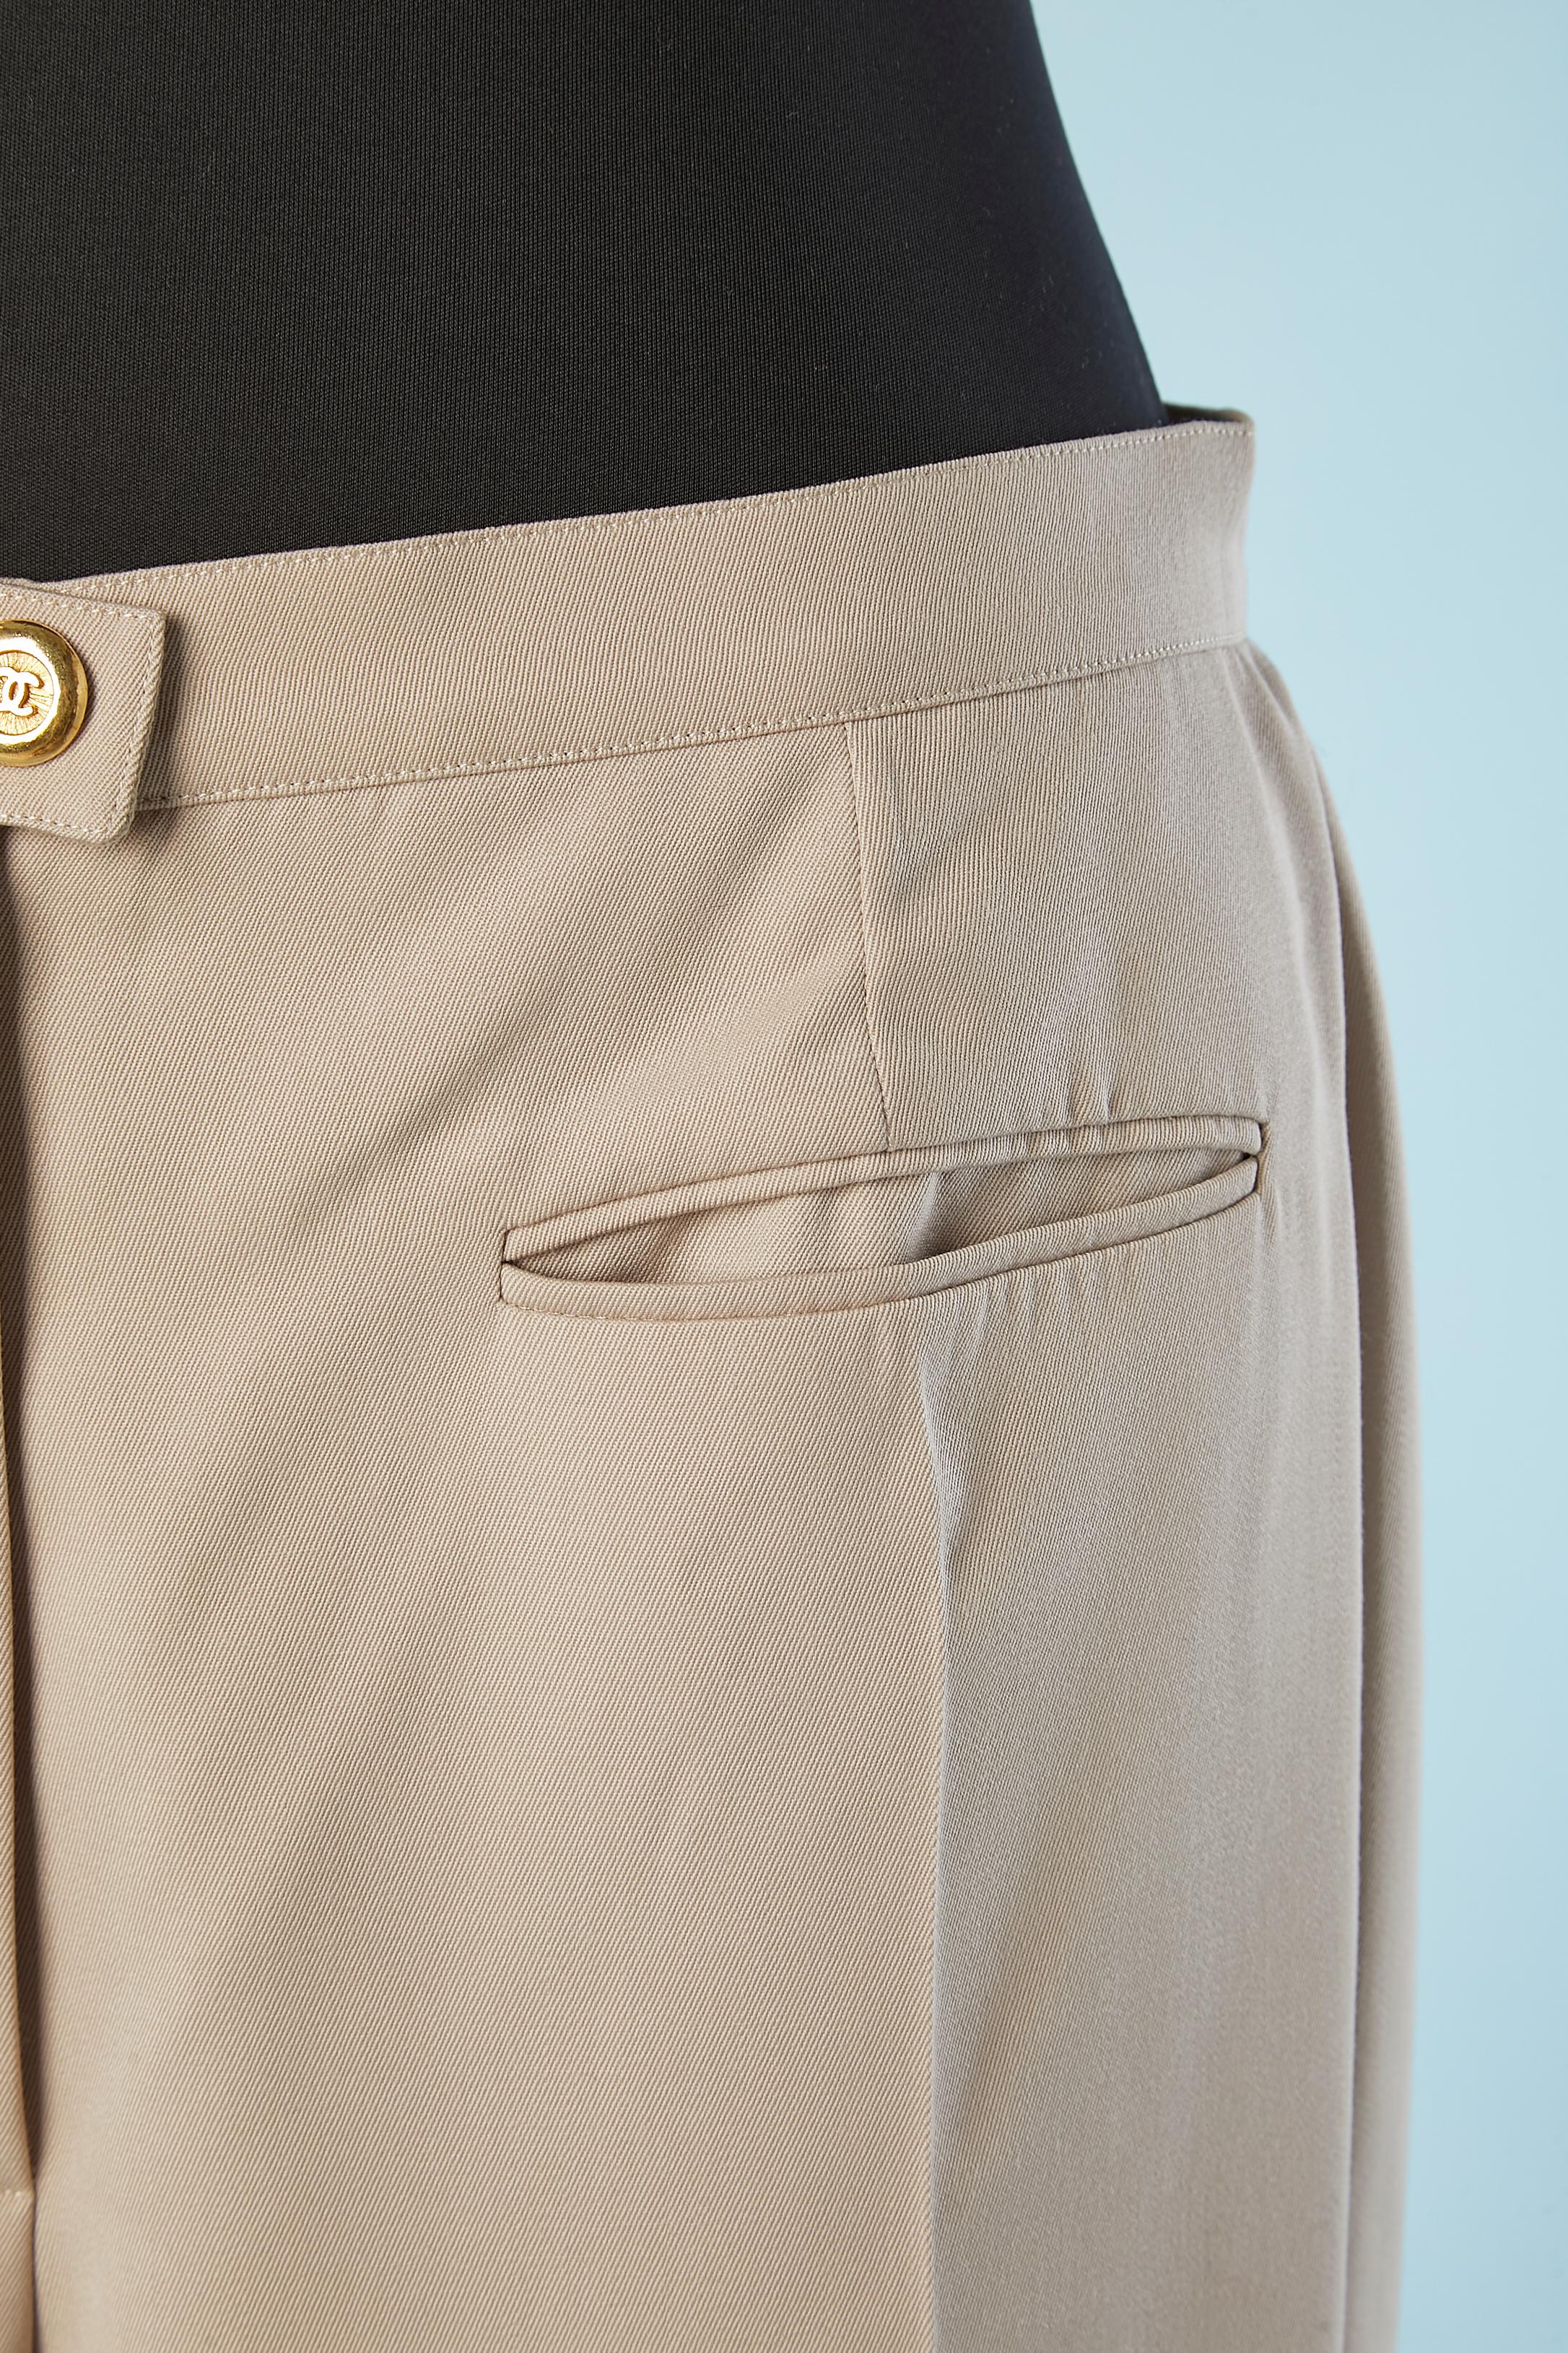 Beige thin wool trouser with branded buttons. Silk branded 